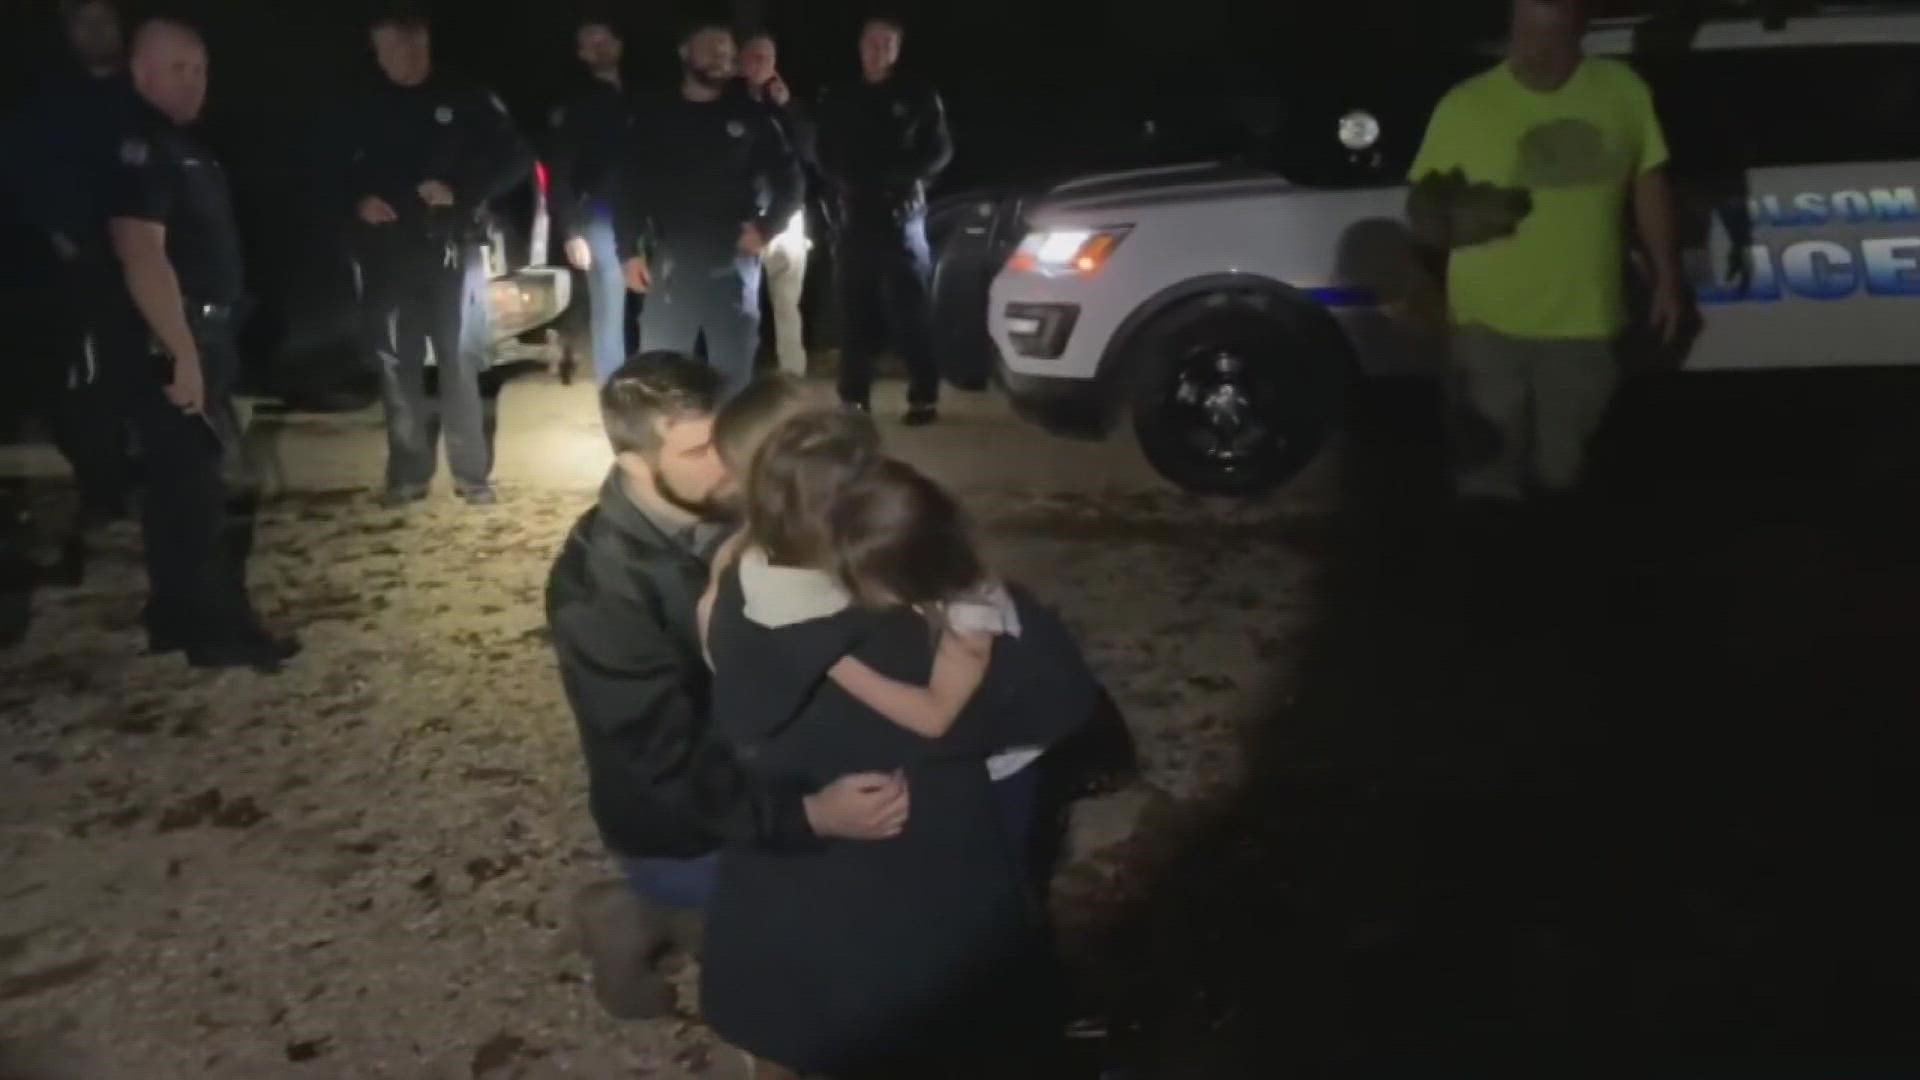 The parents of the missing girls and dog had their prayers answered when all three returned home safely.